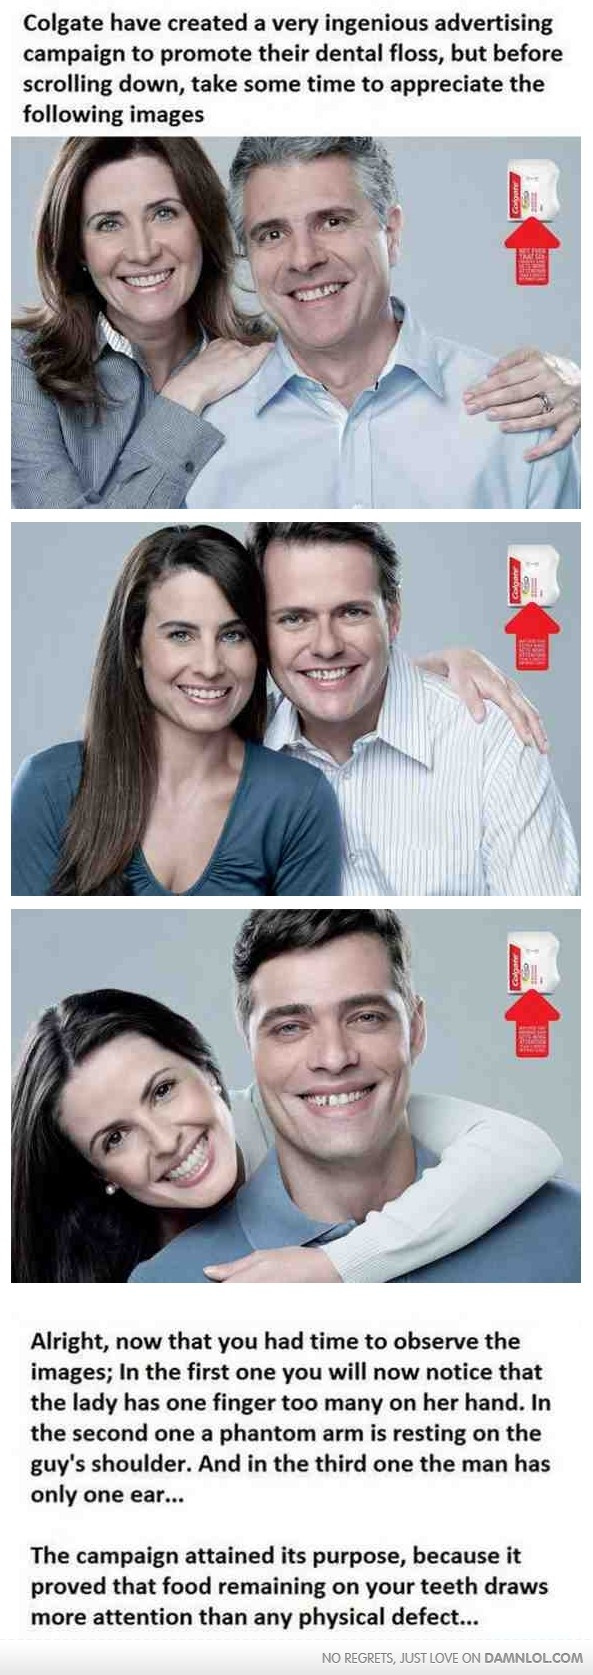 Clever+advertising+campaign+from+Colgate